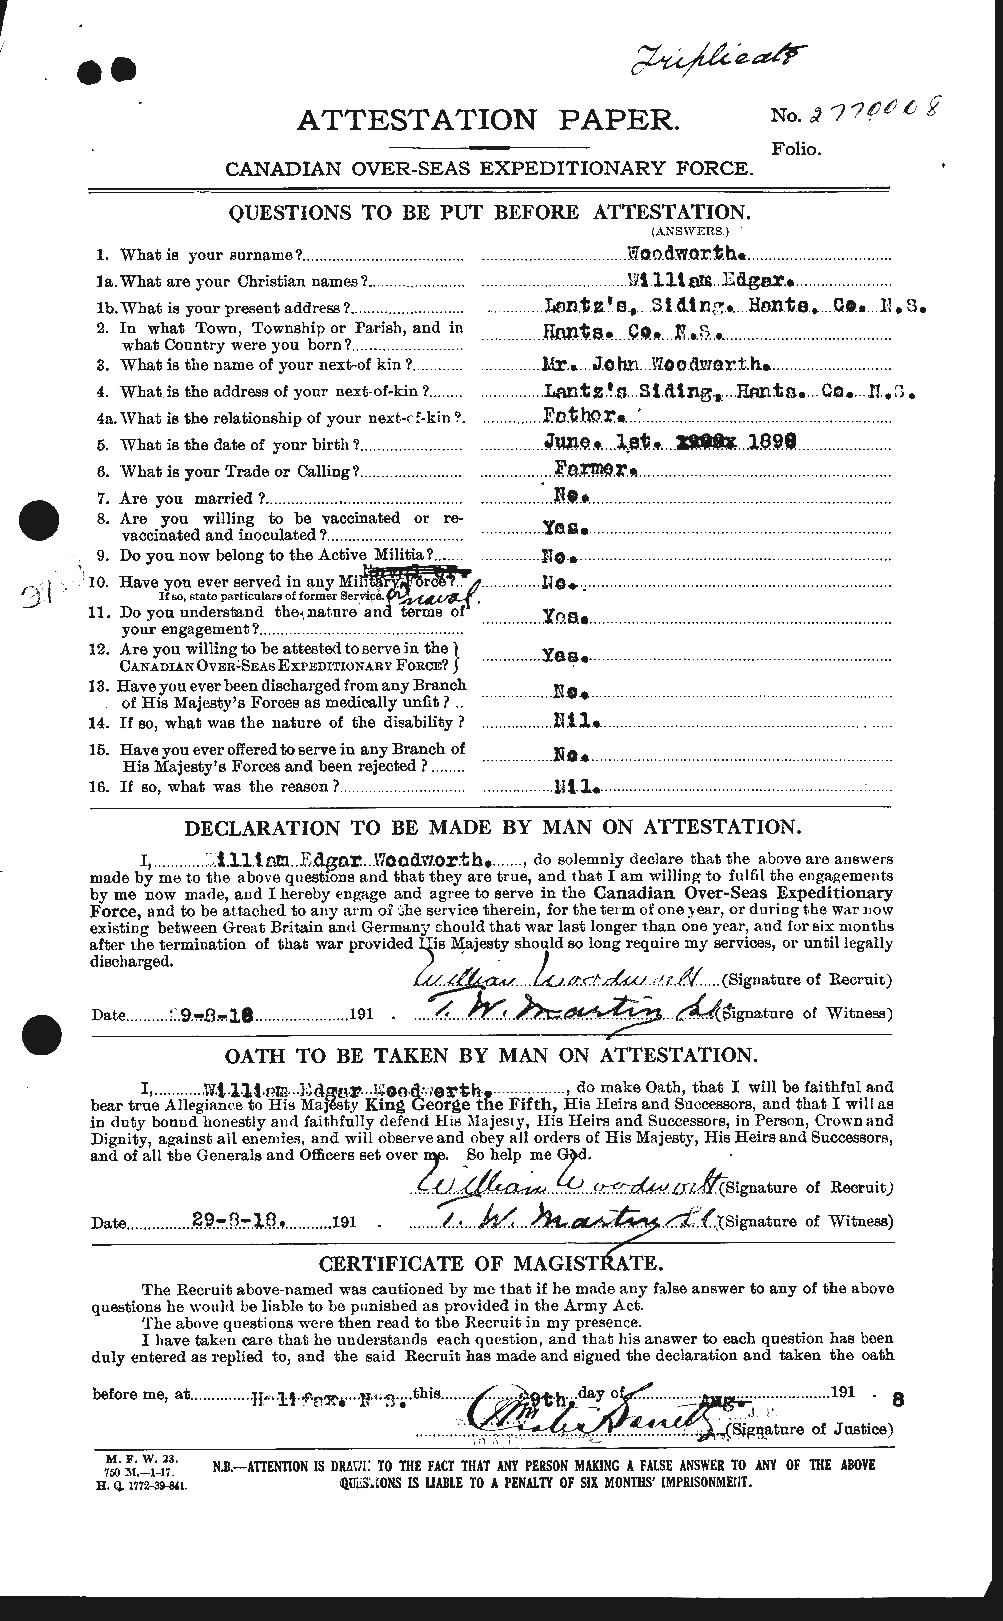 Personnel Records of the First World War - CEF 684953a